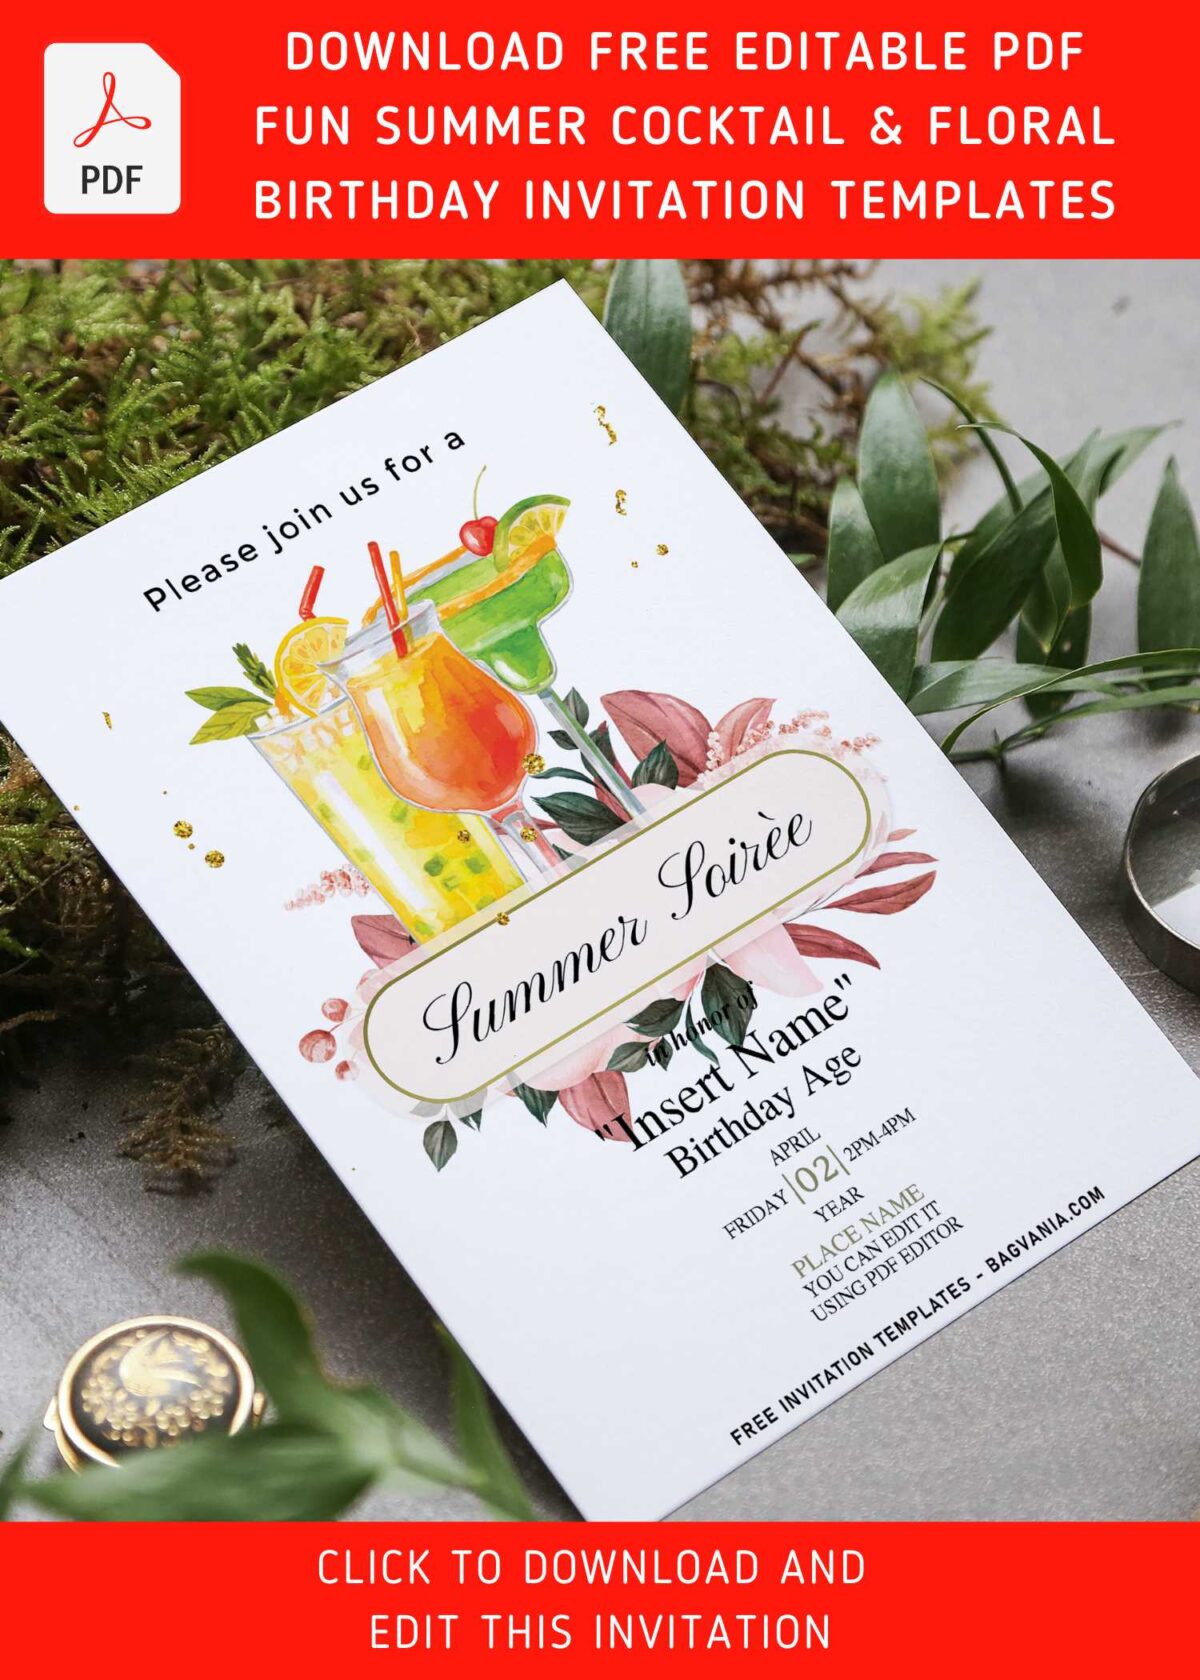 (Free Editable PDF) Fun Summer Soiree Invitation Templates That You Don't Want To Miss with burgundy rose